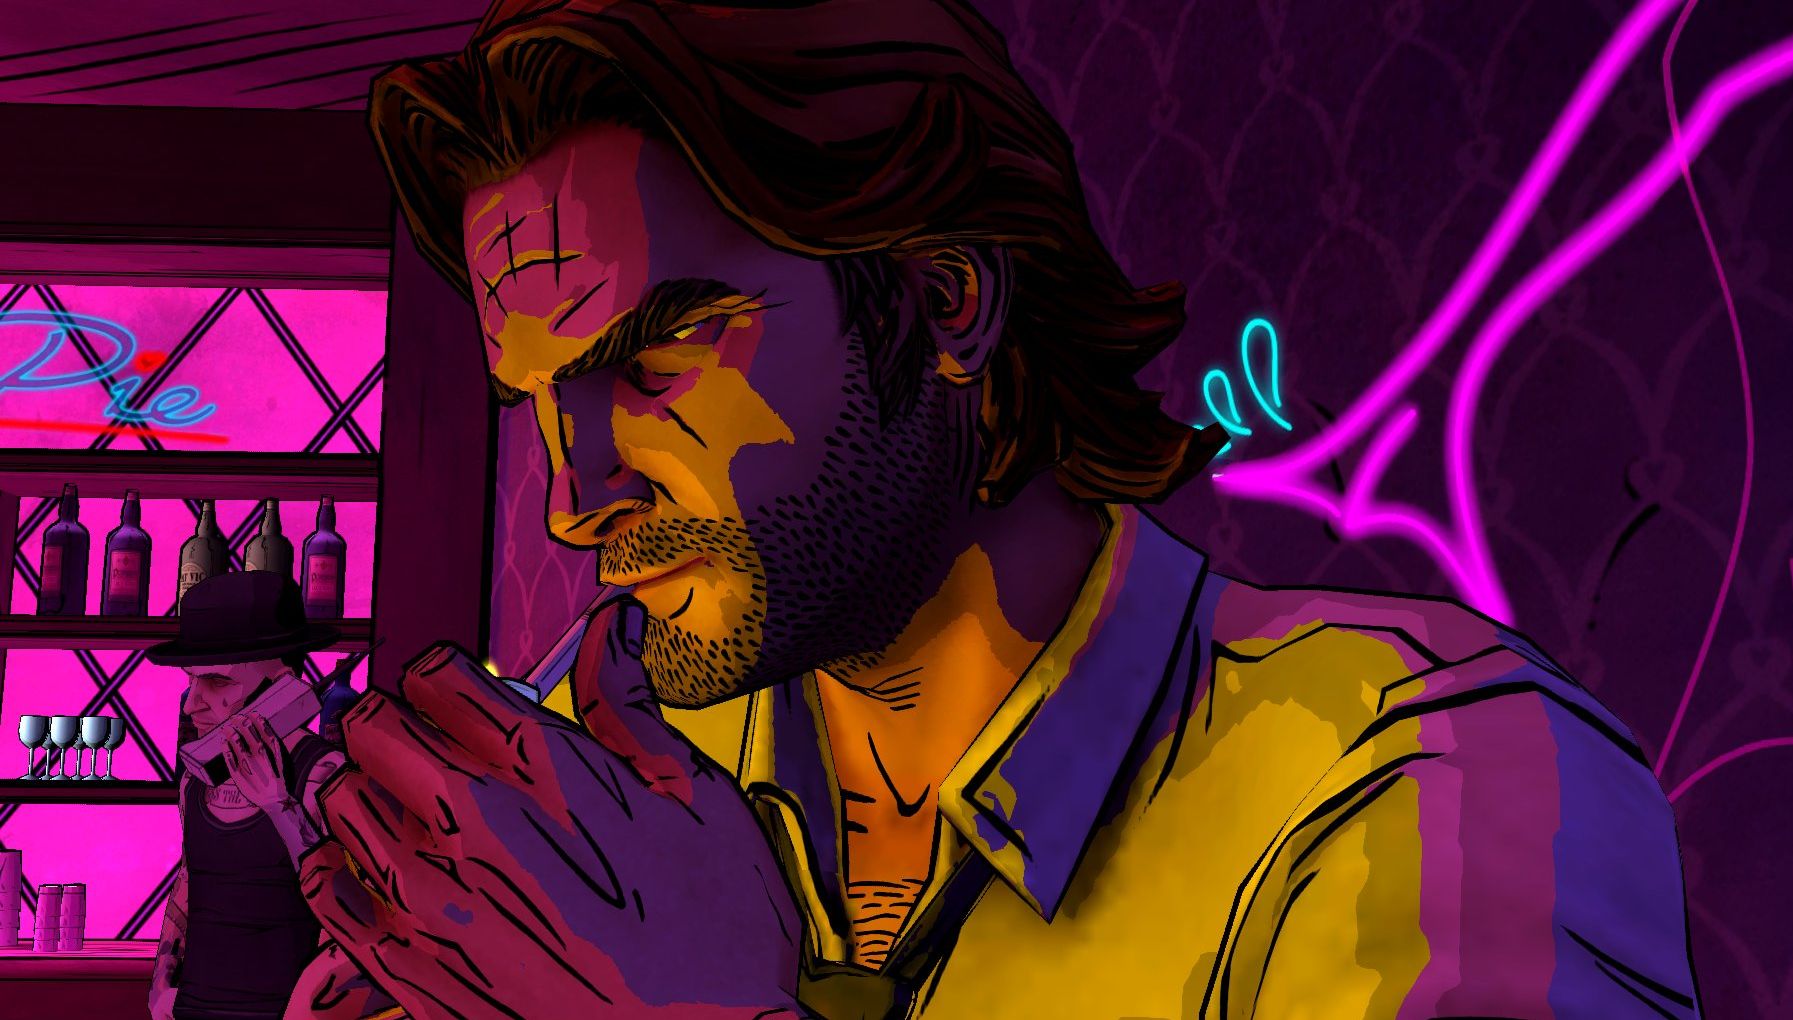 “The Wolf Among Us” Retail Release Announced - All Five Episodes on the Disc for Early November